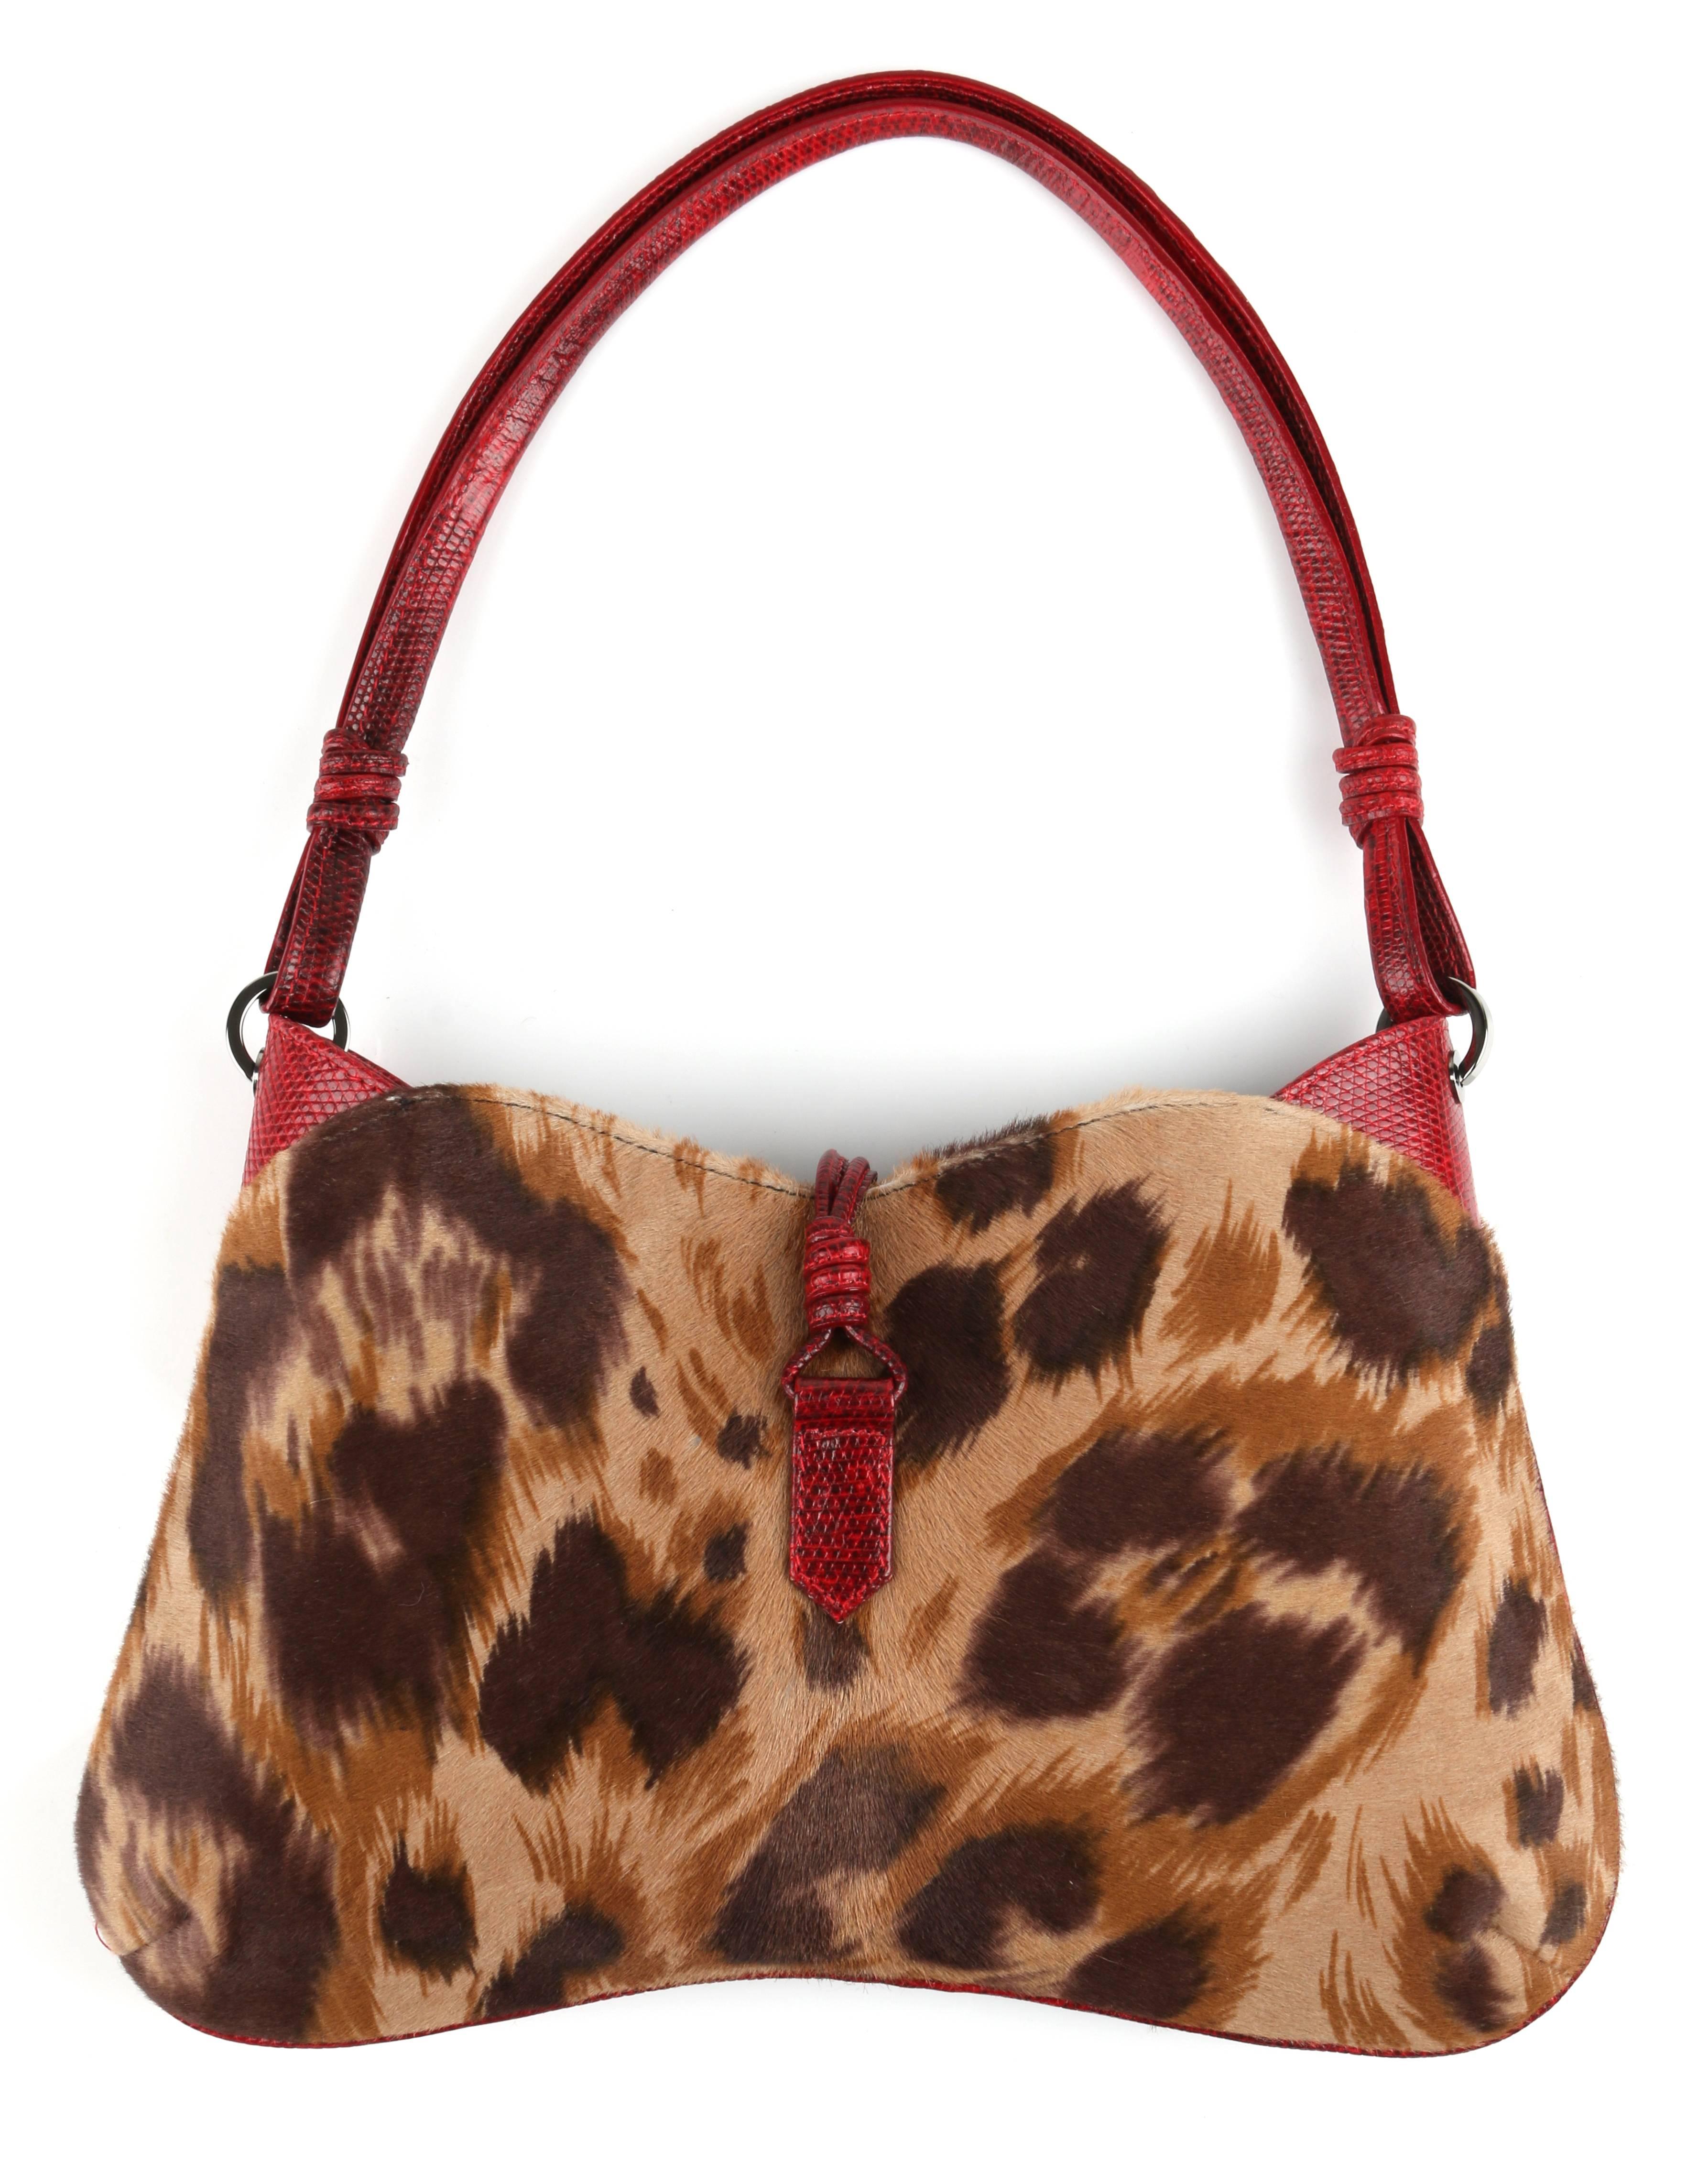 Valentino Garavani pony hair shoulder bag / purse. Body of the bag is a light and dark brown animal print pony hair. Center front is floral embroidered black suede. Piping, trim and shoulder strap are a red lizard skin leather. Closure is a weighted